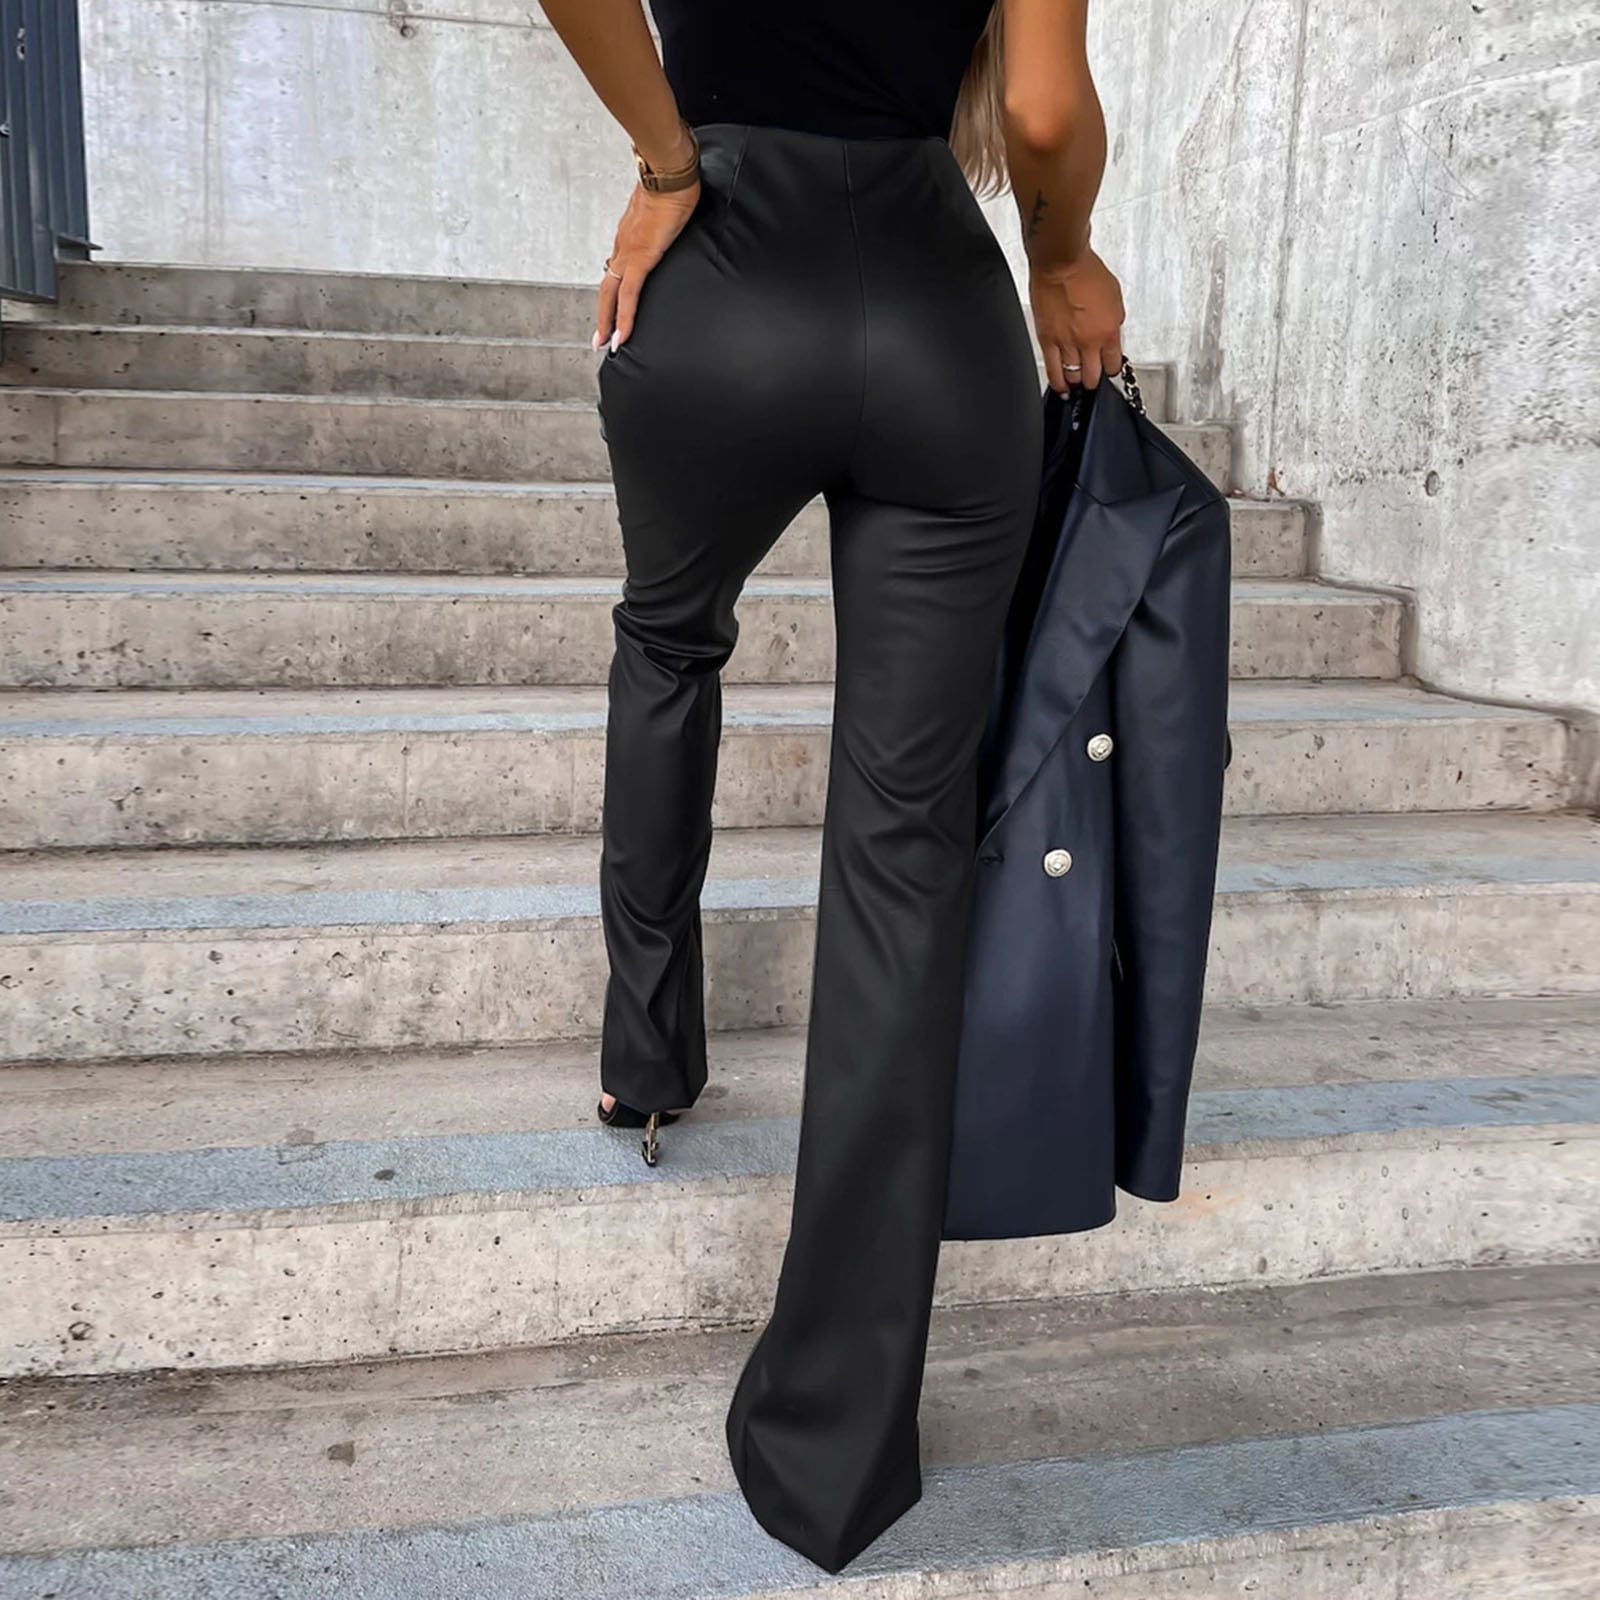 Womens High Waist PU Leather Pants Slim Fitted Flare Bootcut Pants